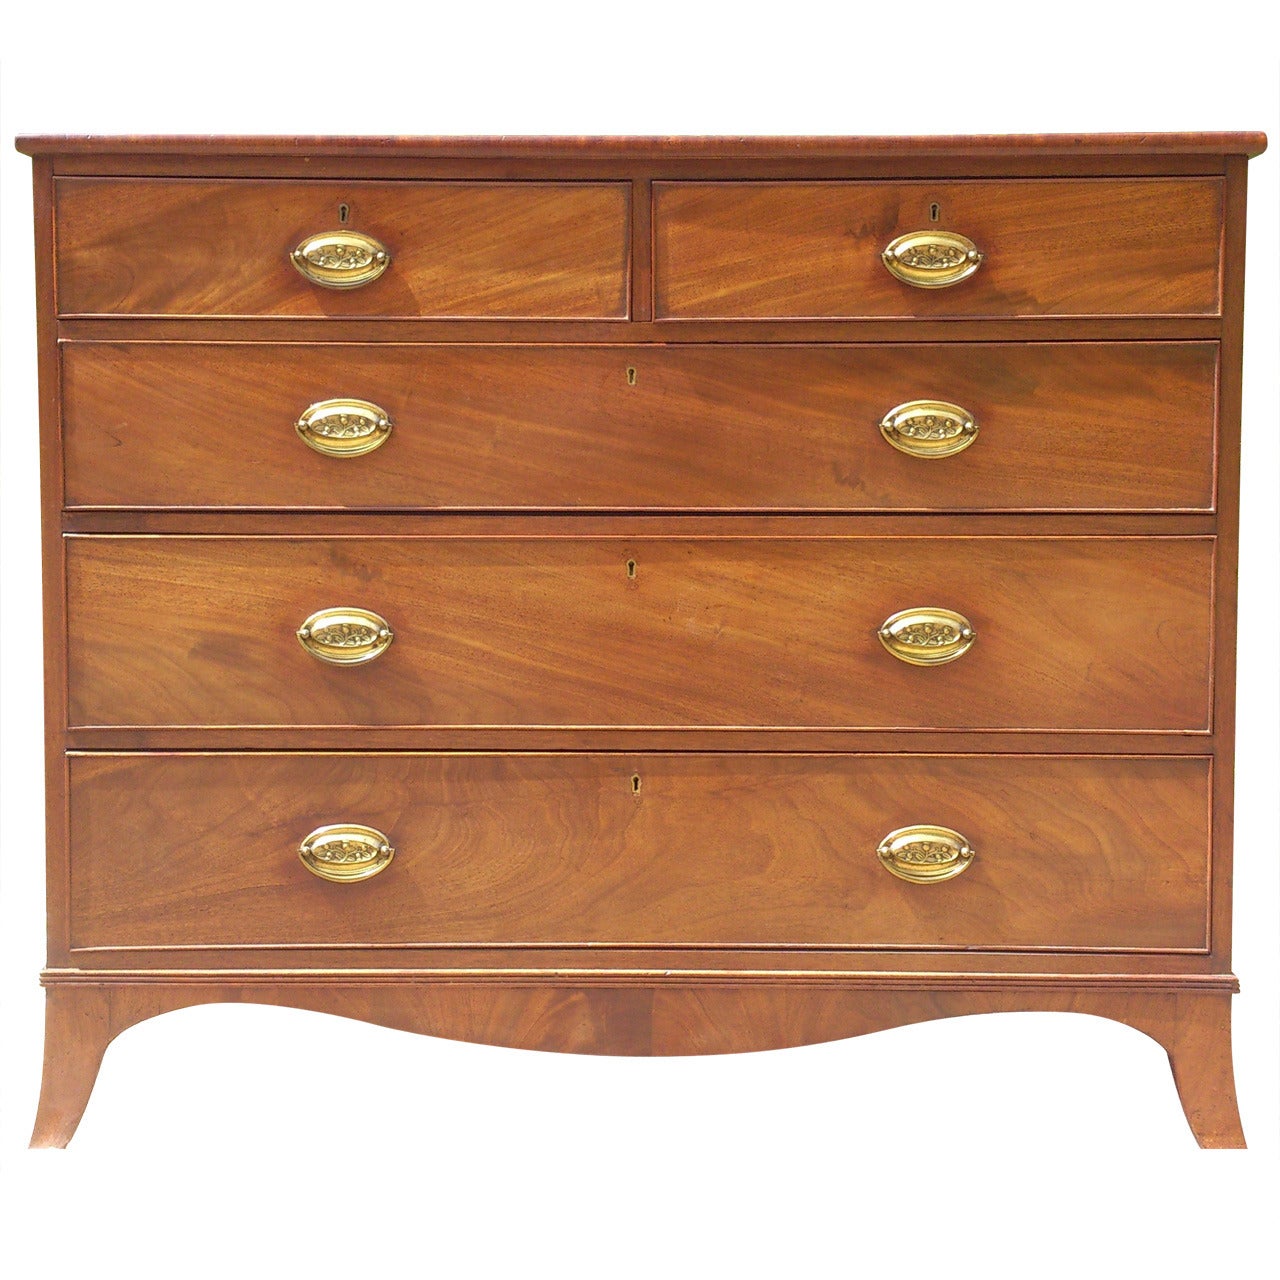 Early Nineteenth Century Mahogany Antique Chest of Drawers